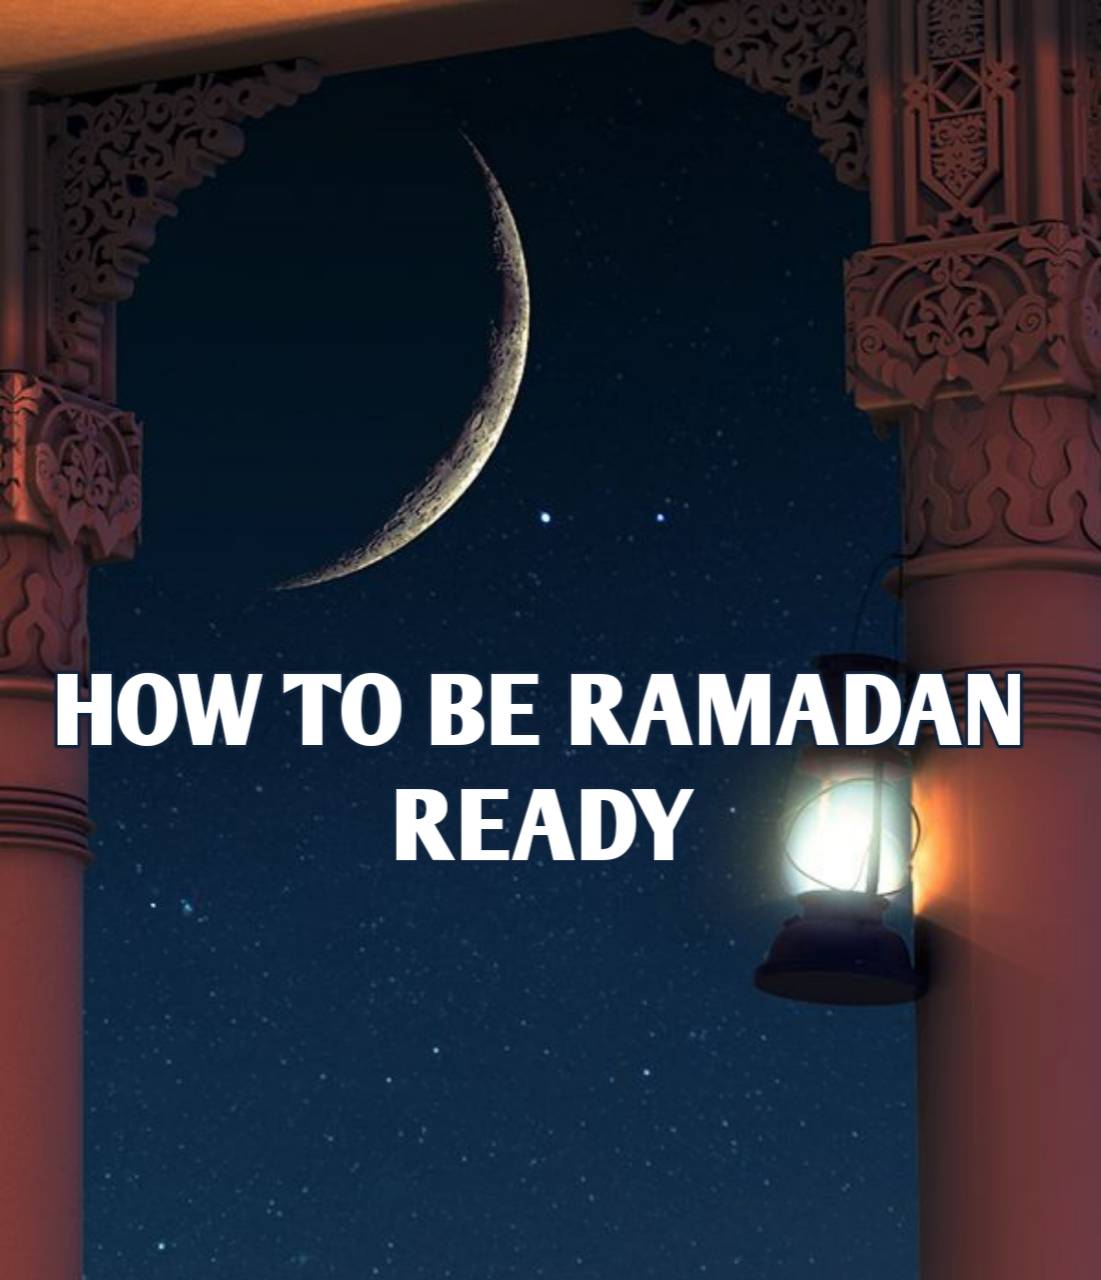 How to prepare for Ramadhan